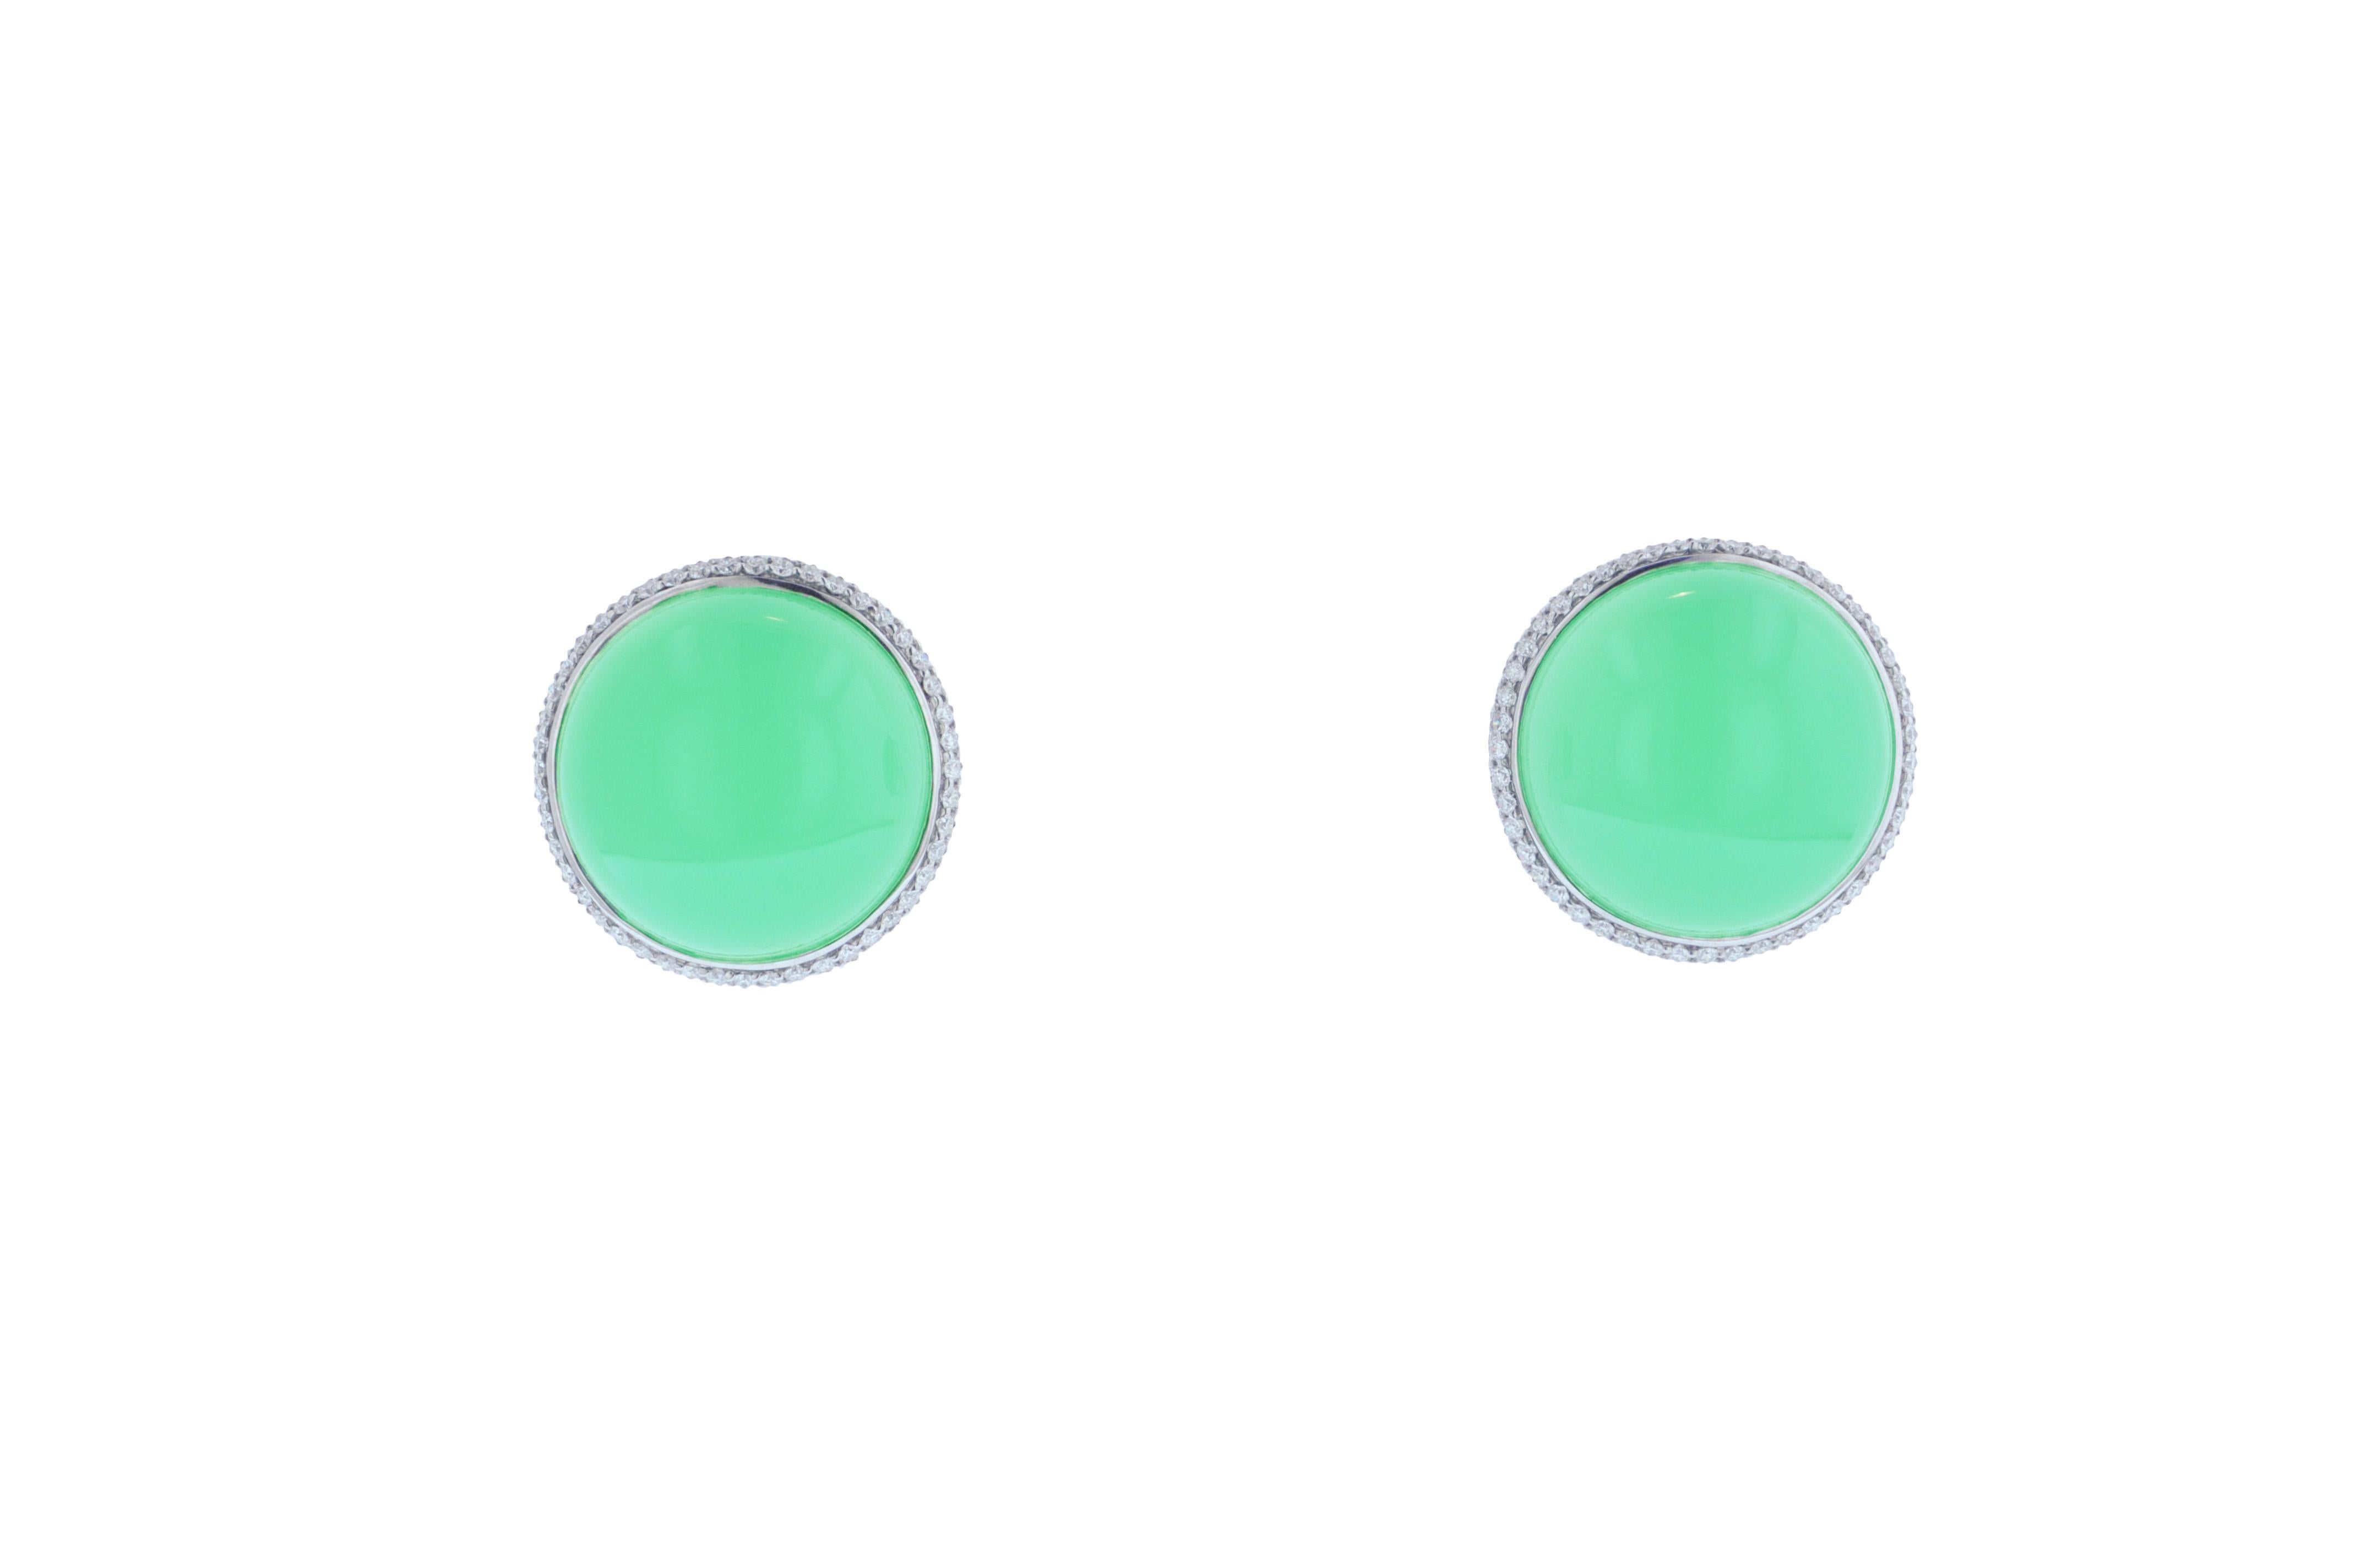 18k white gold earclips featuring 50.42 carats of round chrysoprase and 2.03 carats of white round diamonds.

188 diamonds: 2.03 carats.

Diameter almost 1 inch